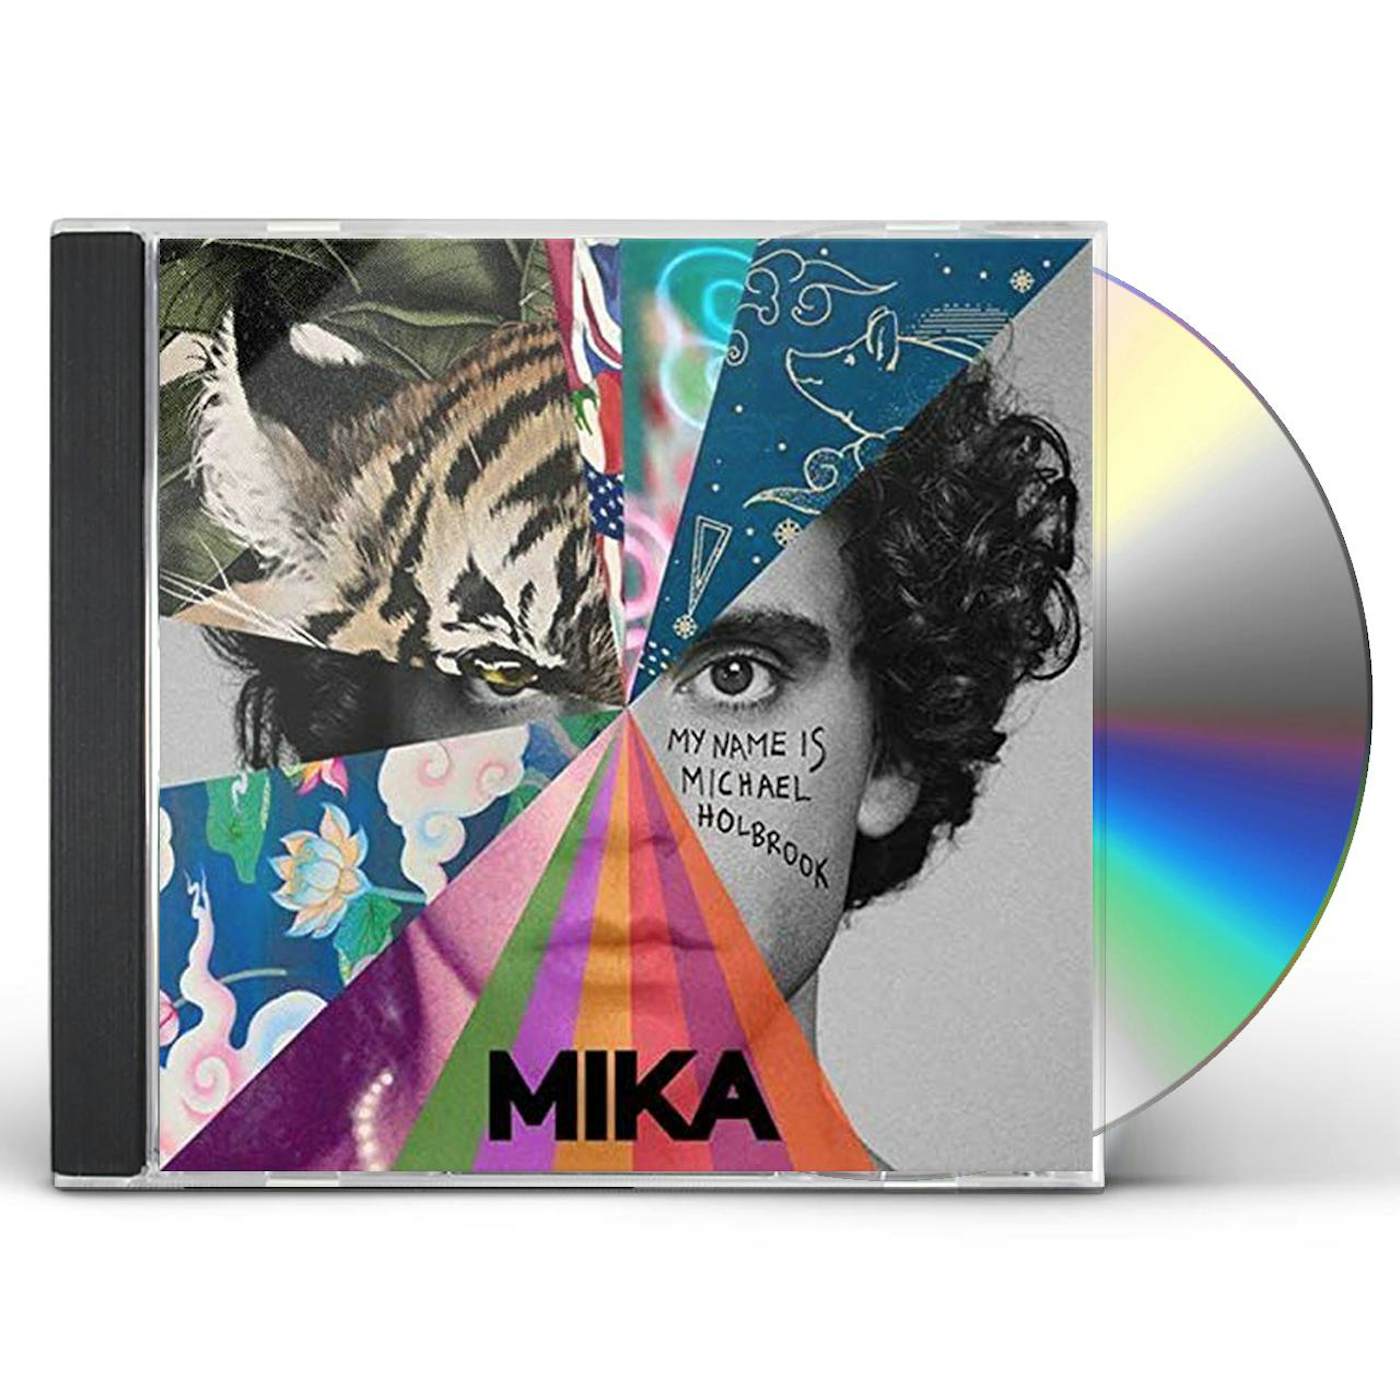 my name is michael holbrook cd - MIKA